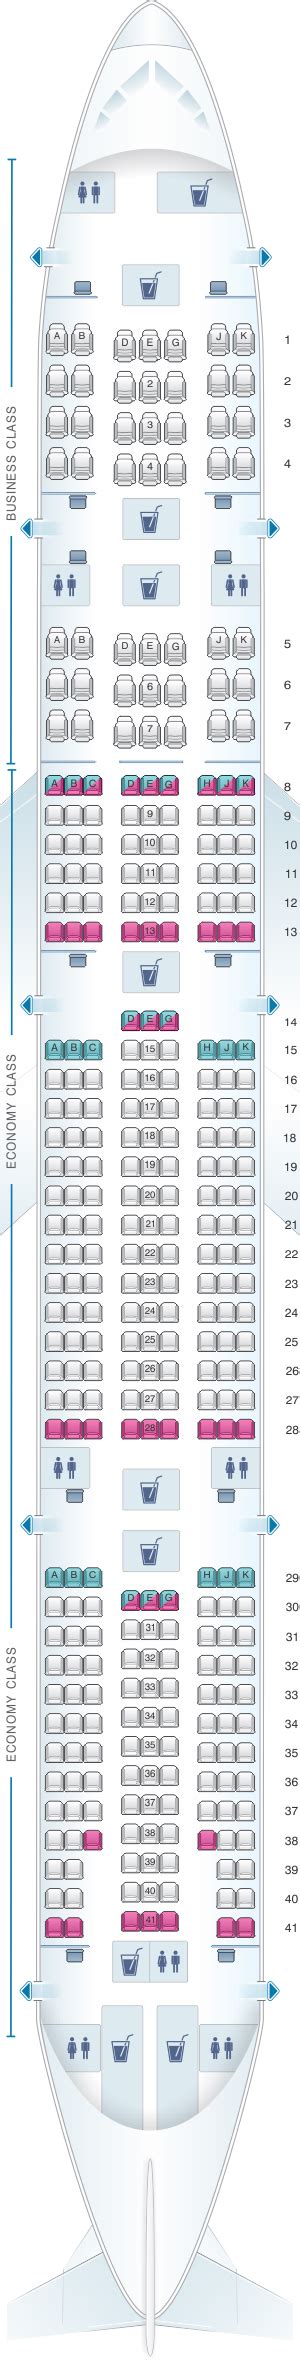 turkish airlines map of seats